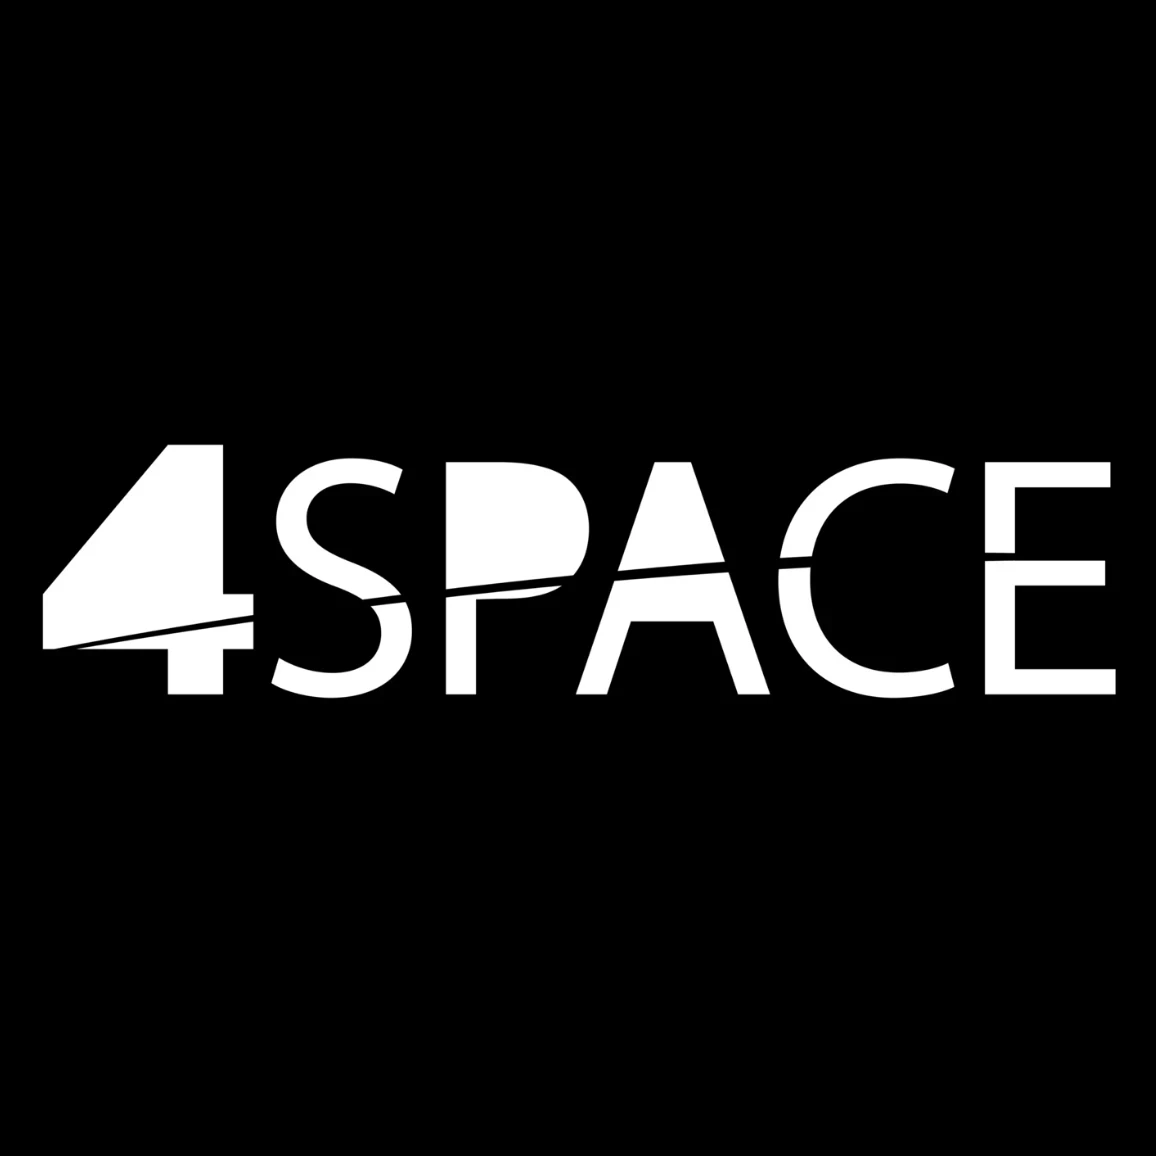 4SPACE